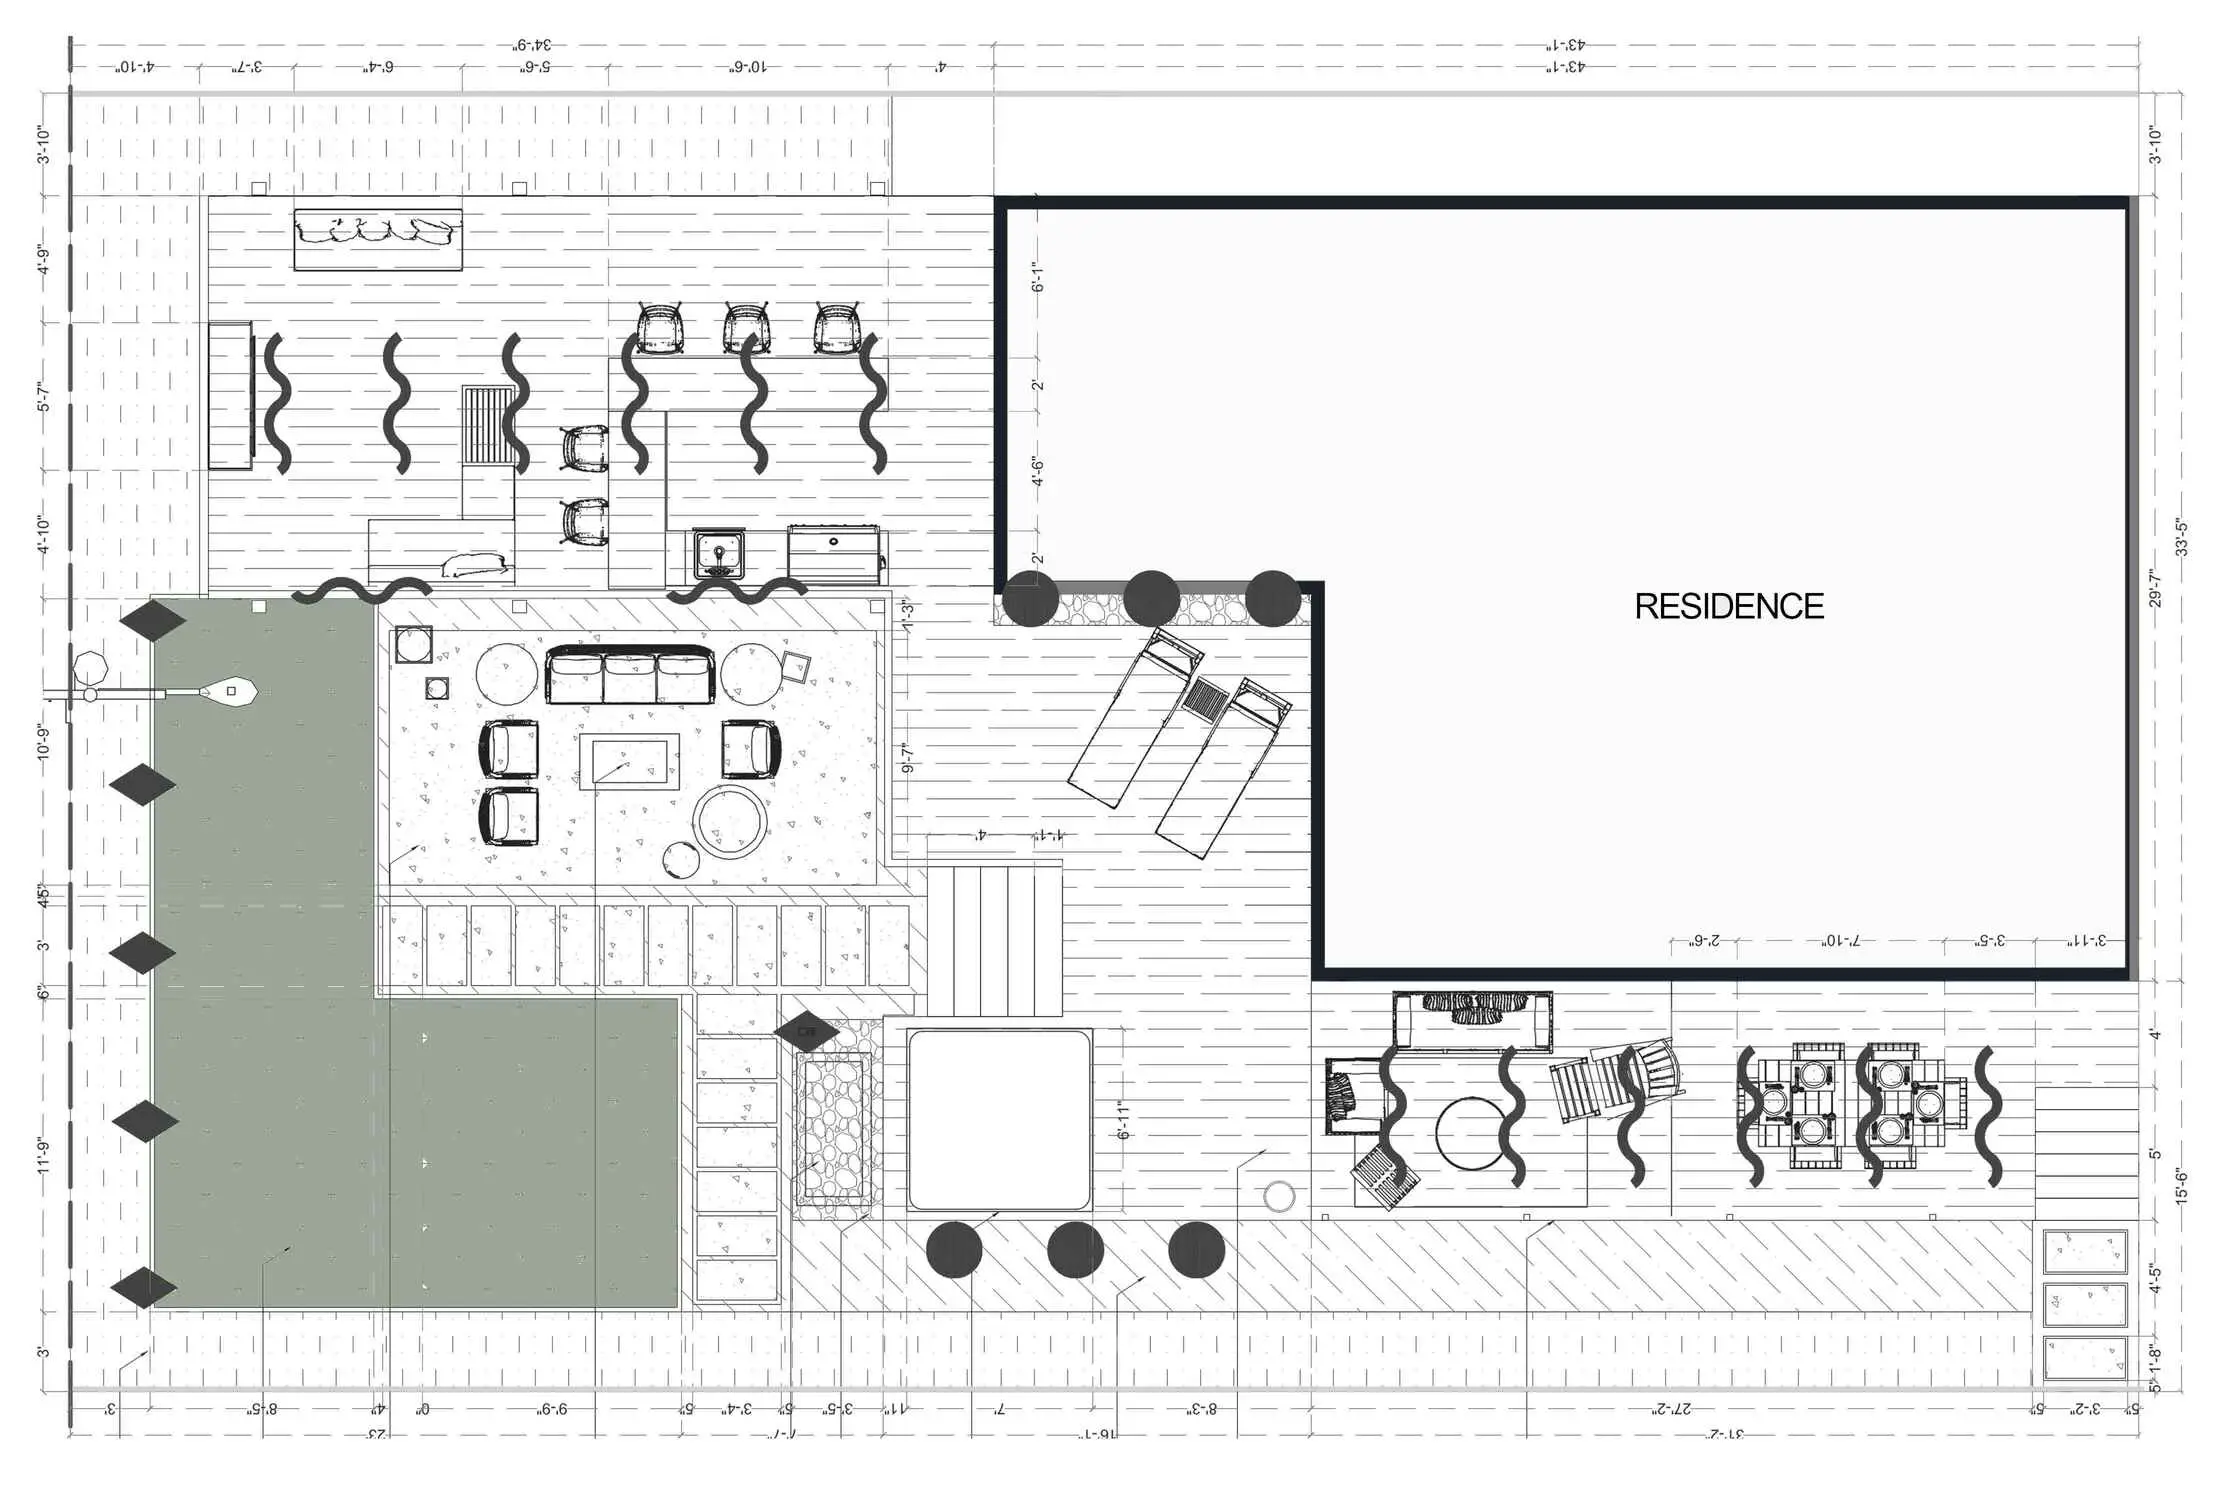 Landscape floor plan with outdoor living features and dimensions next to a residence